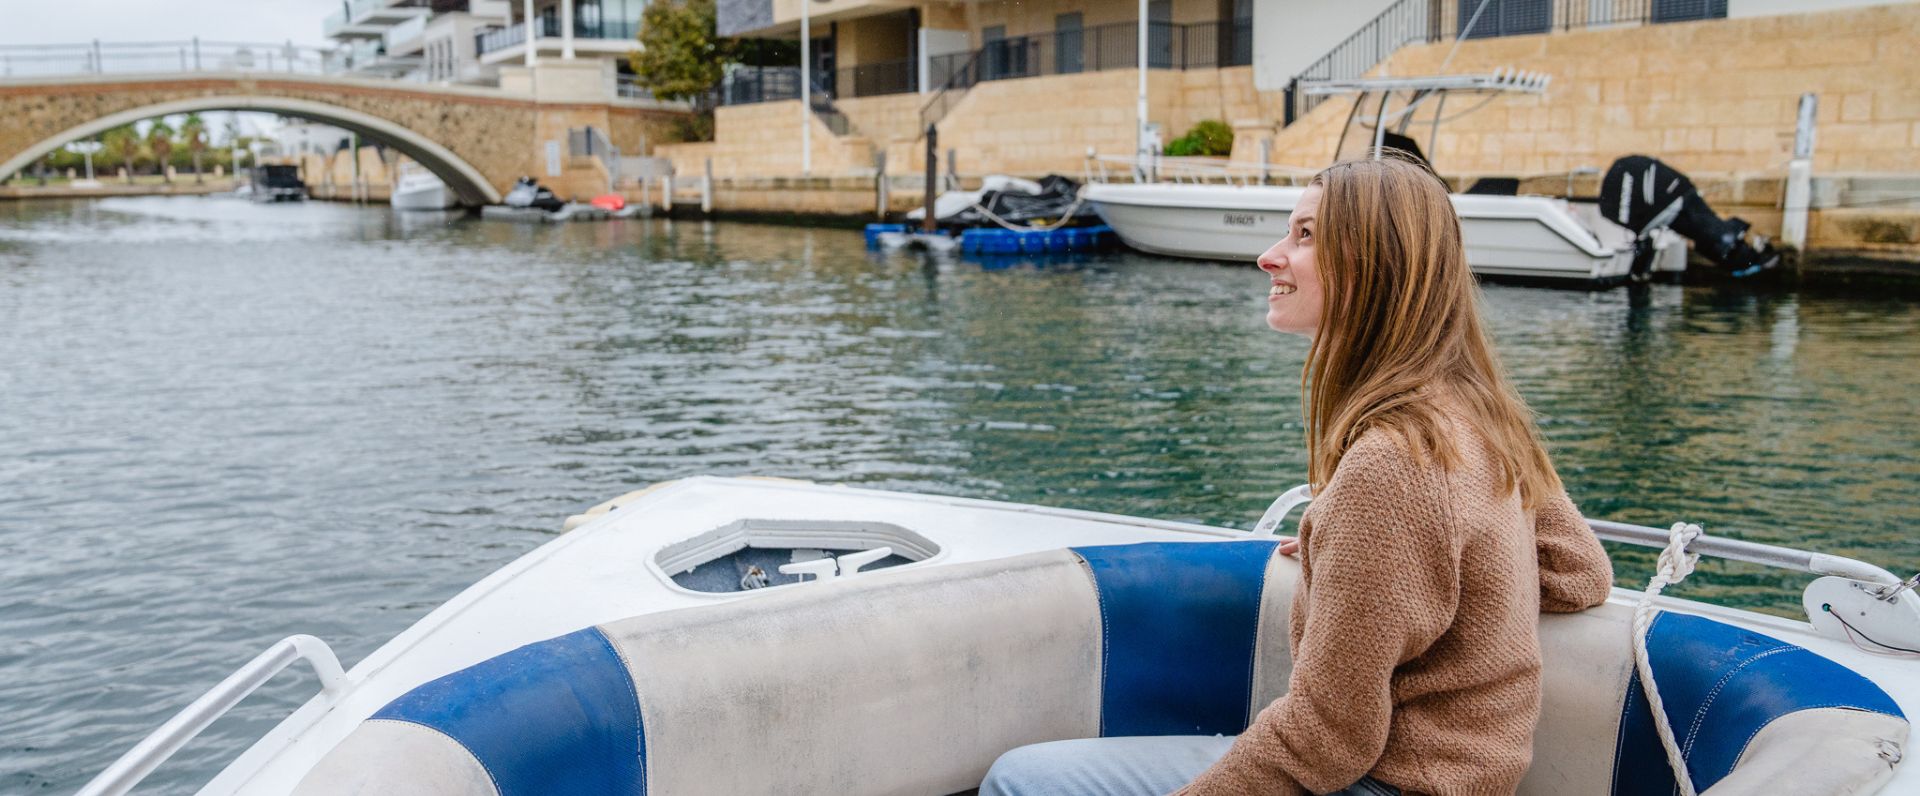 a woman is sitting in the back of a boat on the water